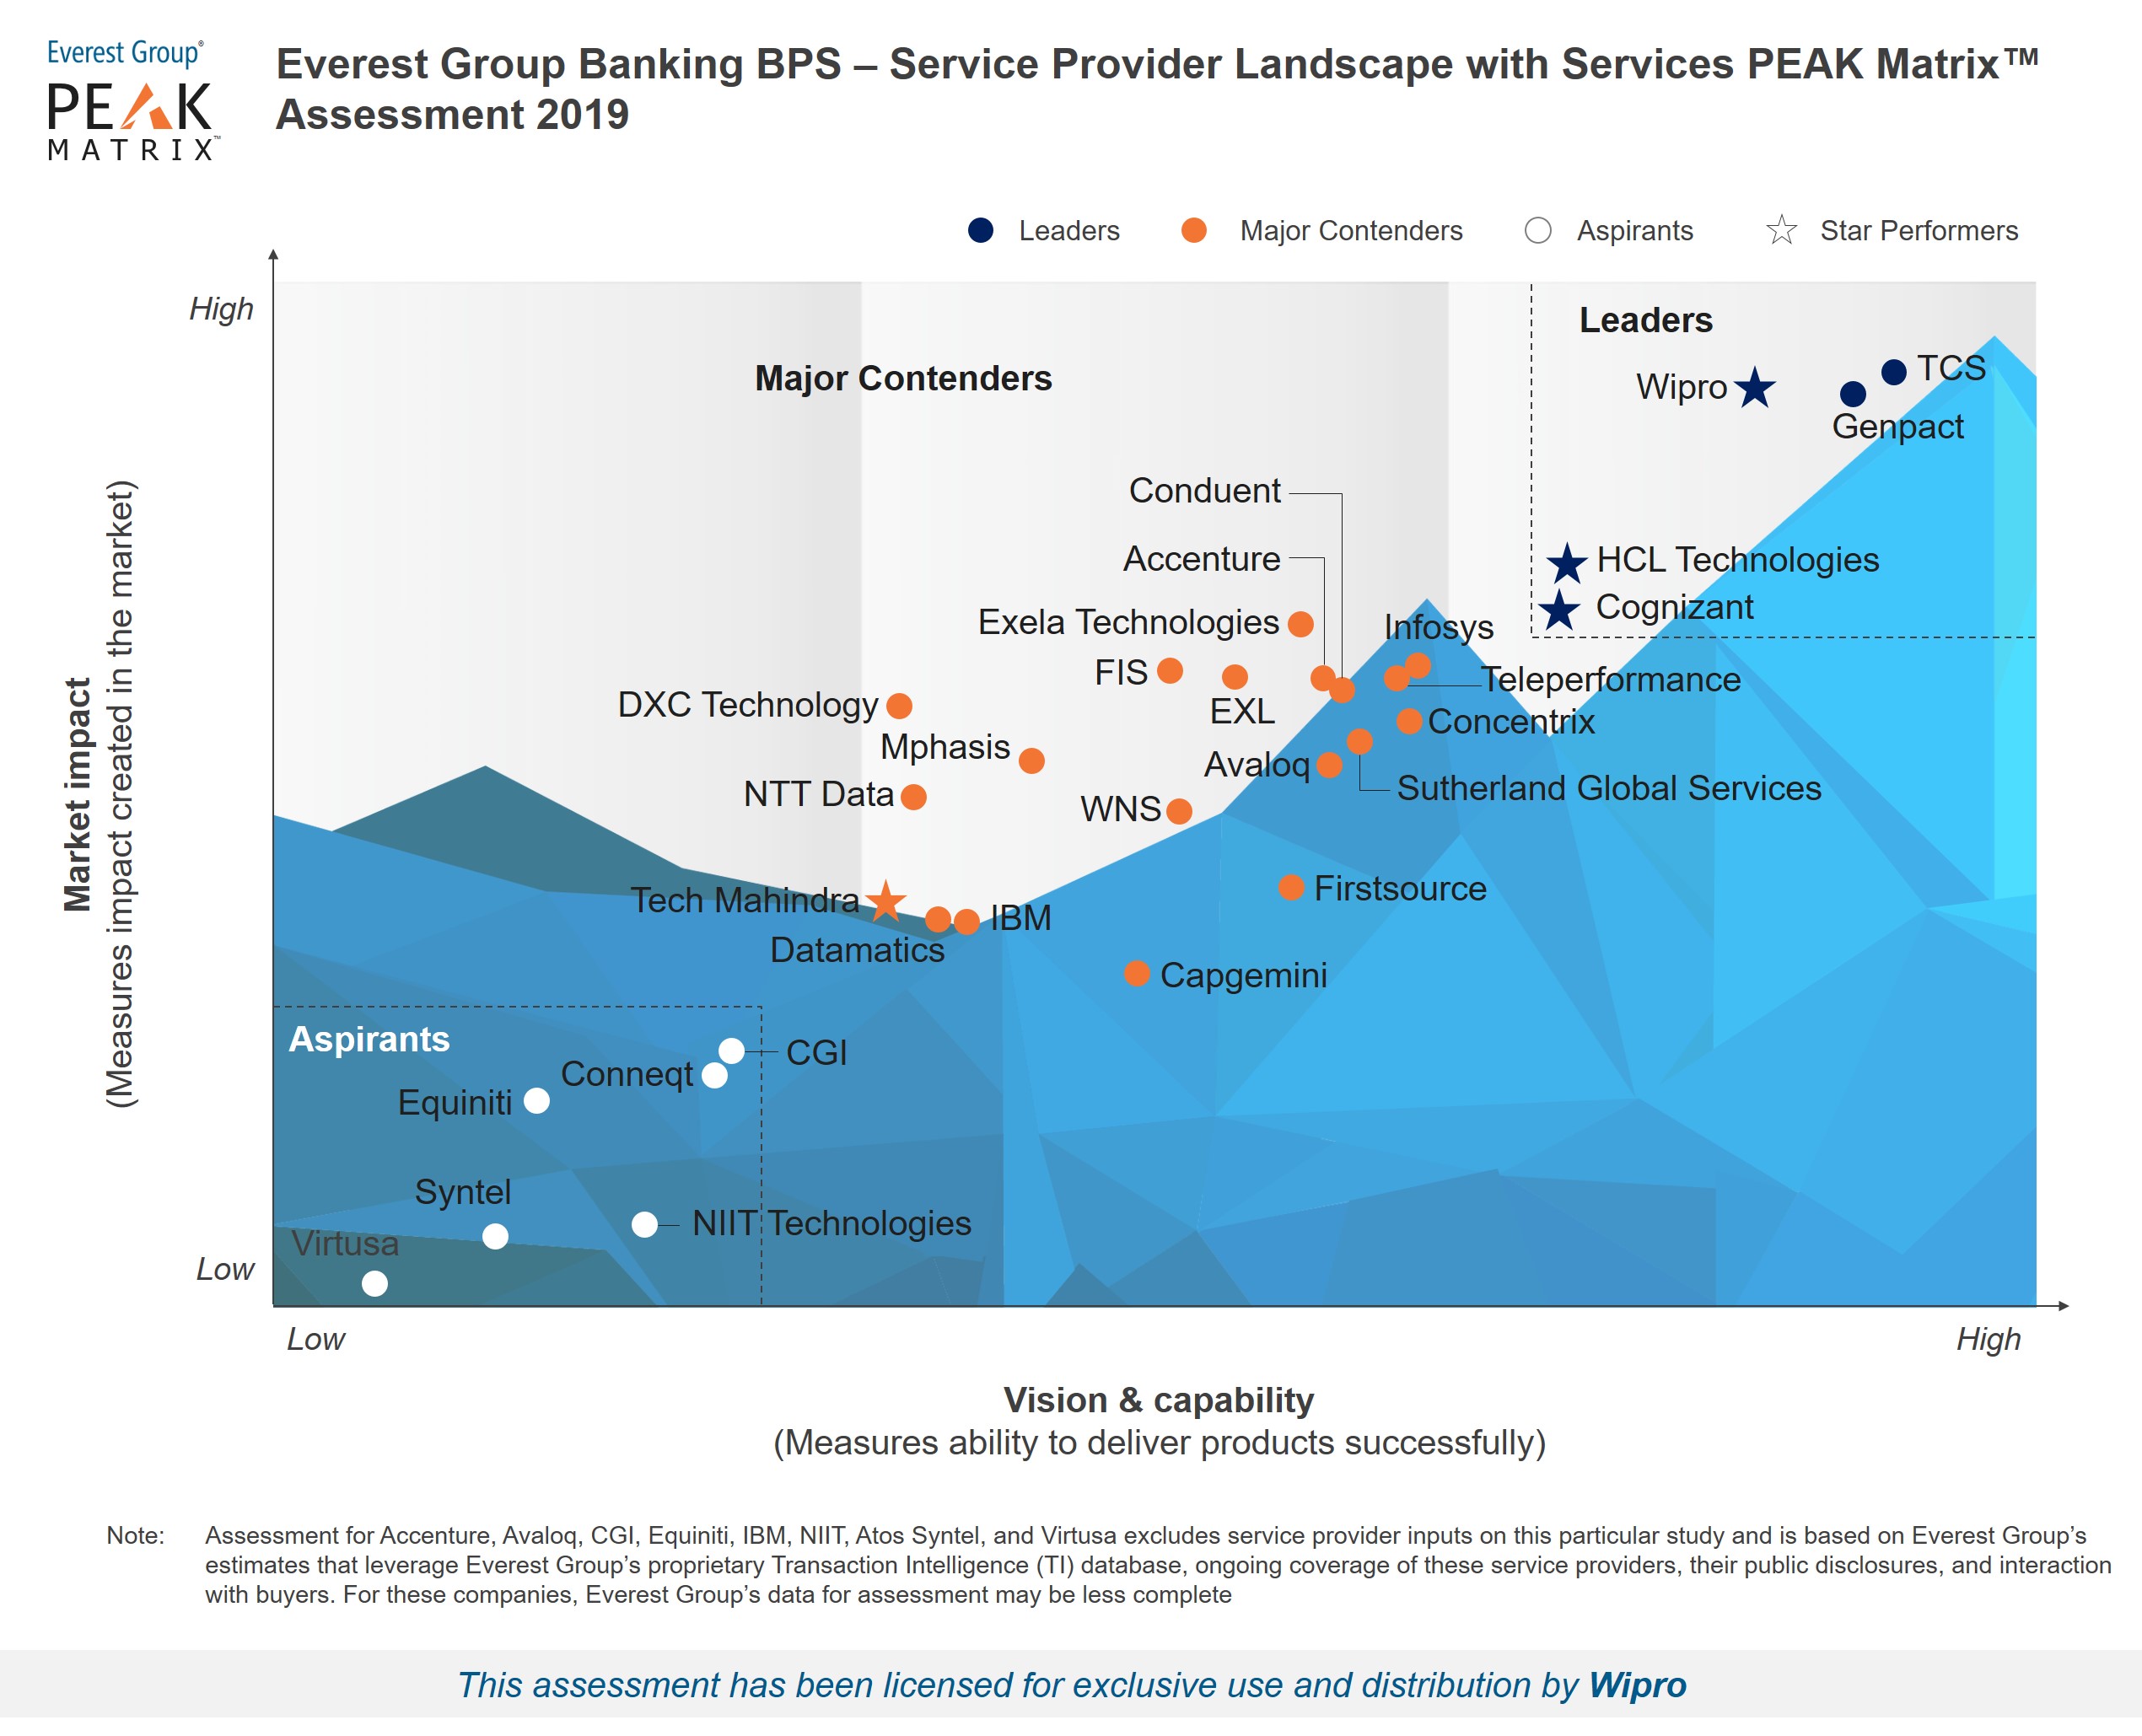 Wipro recognized as a Leader in Everest Group’s Banking BPS – Service Provider Landscape with Services PEAK Matrix Assessment 2019